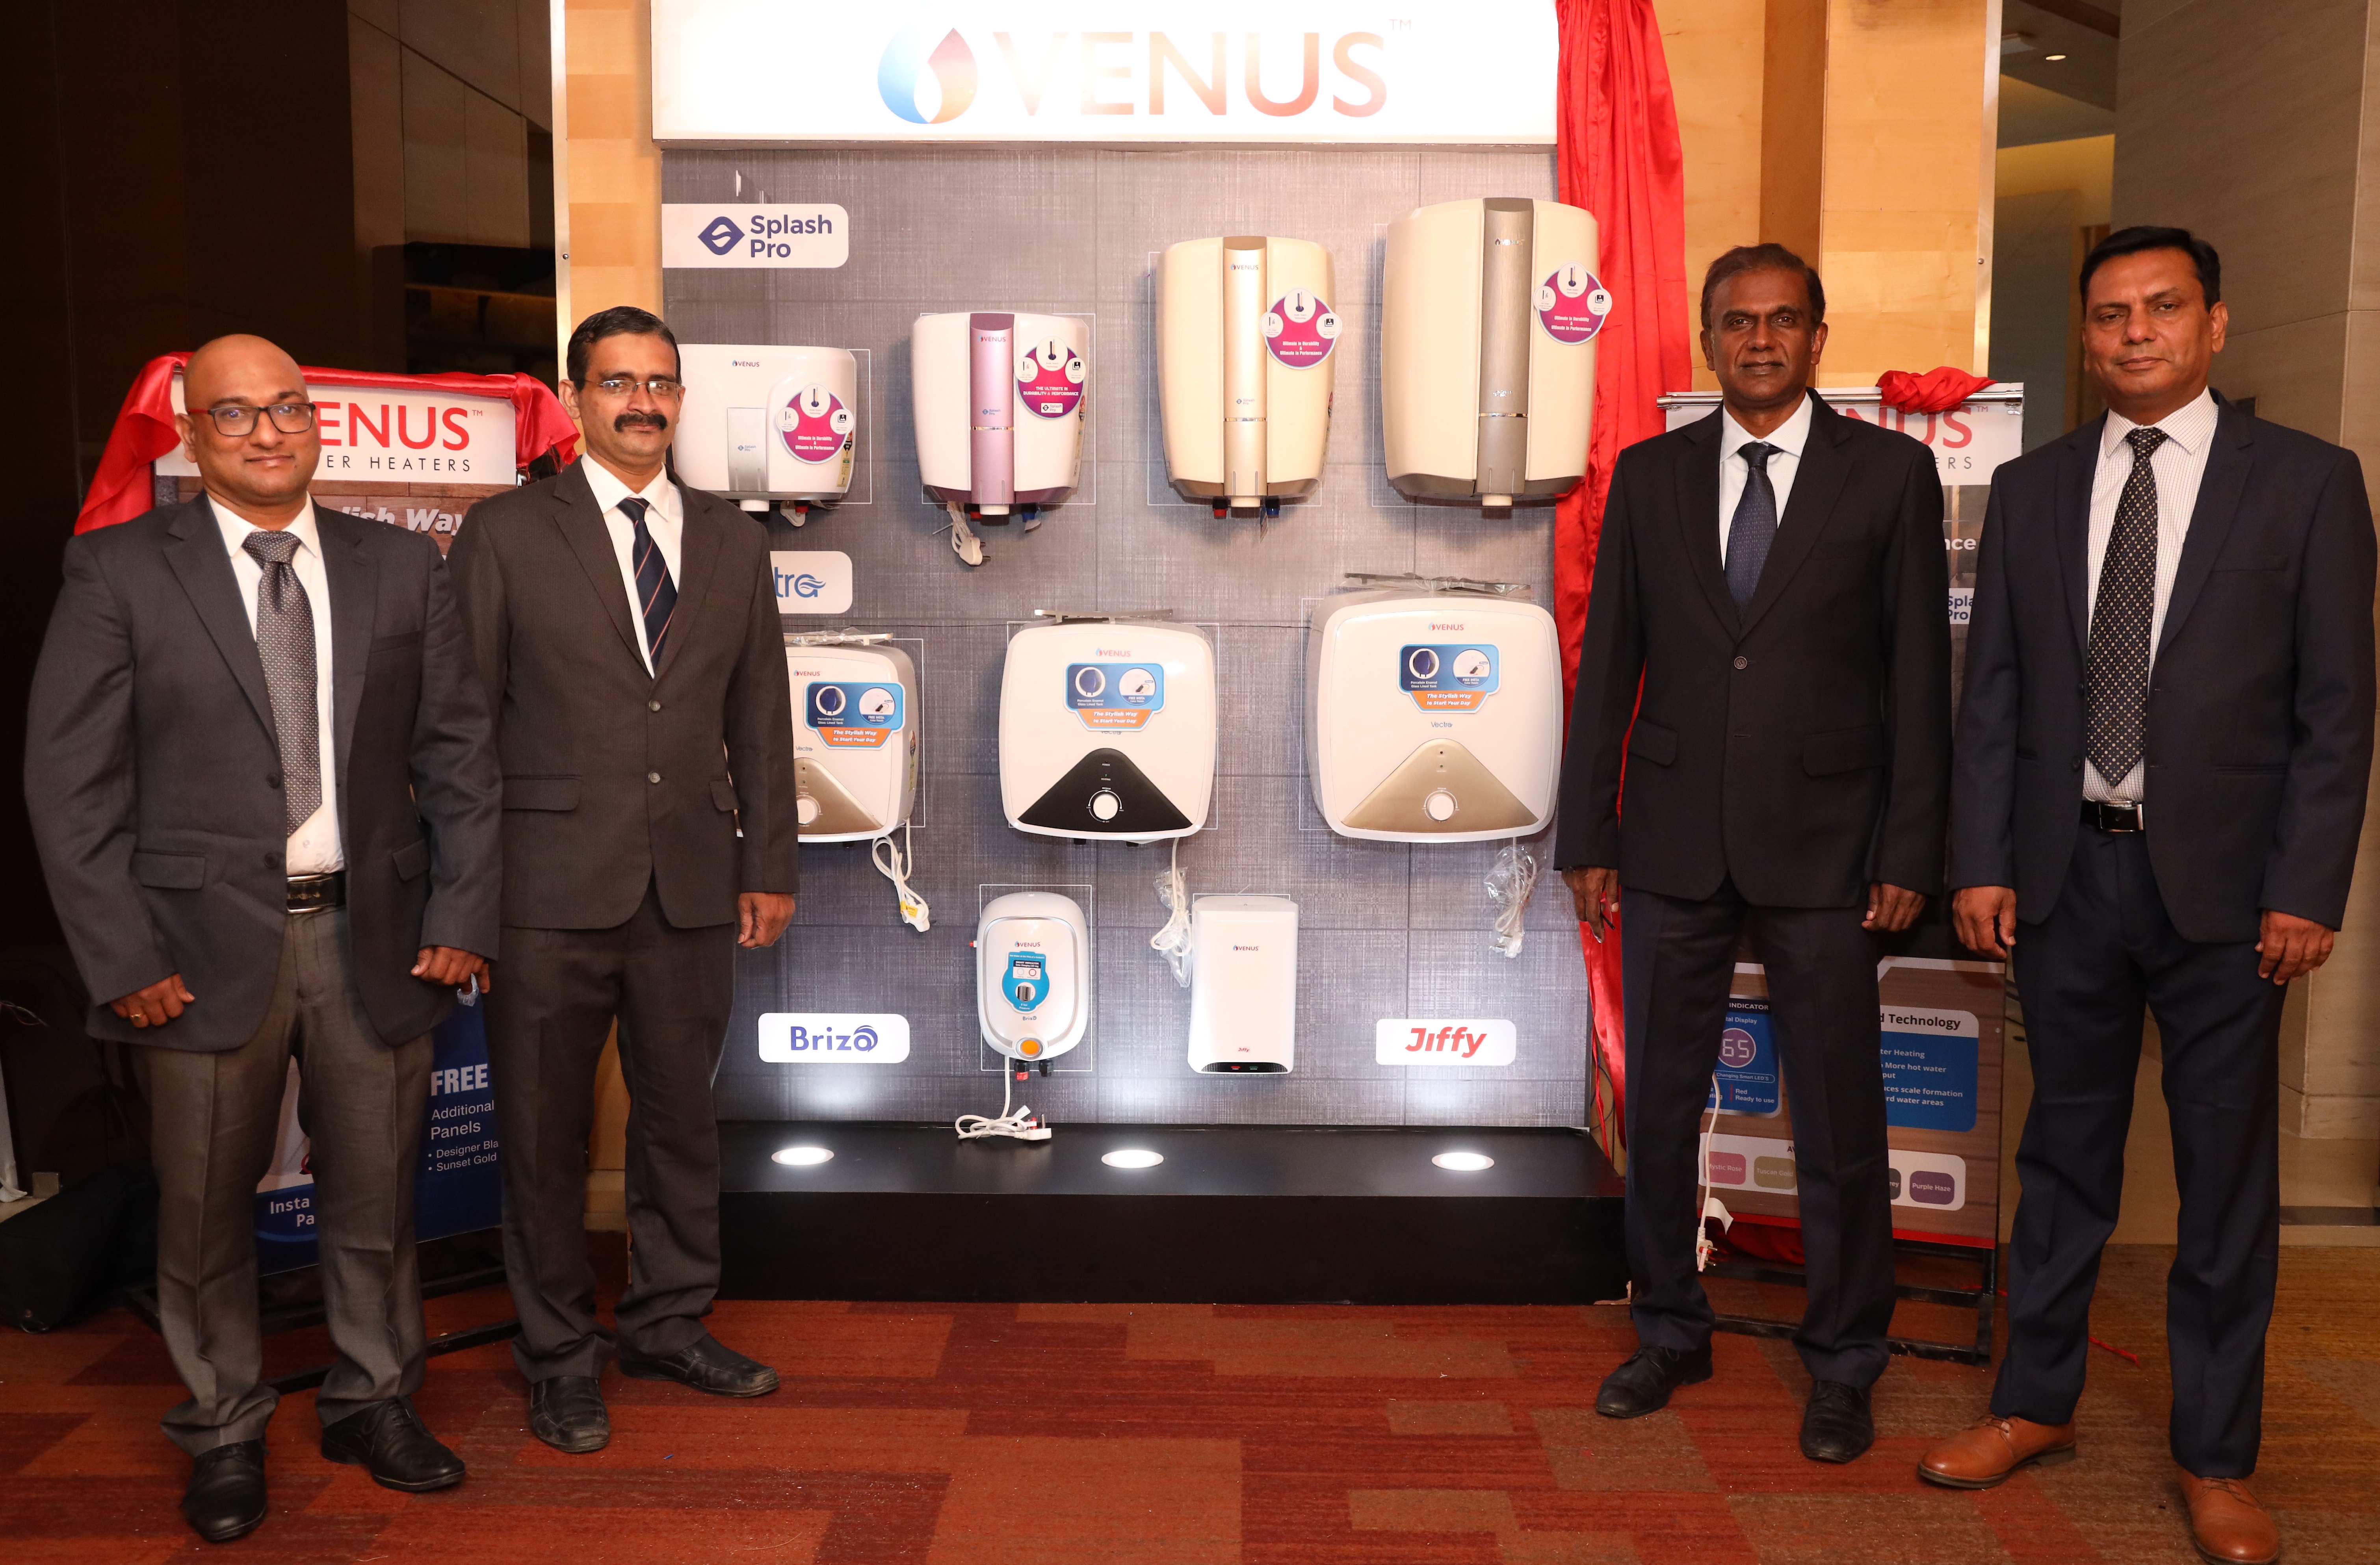 “Venus Home Appliances Launches New Line-up of Instant and Storage Water”